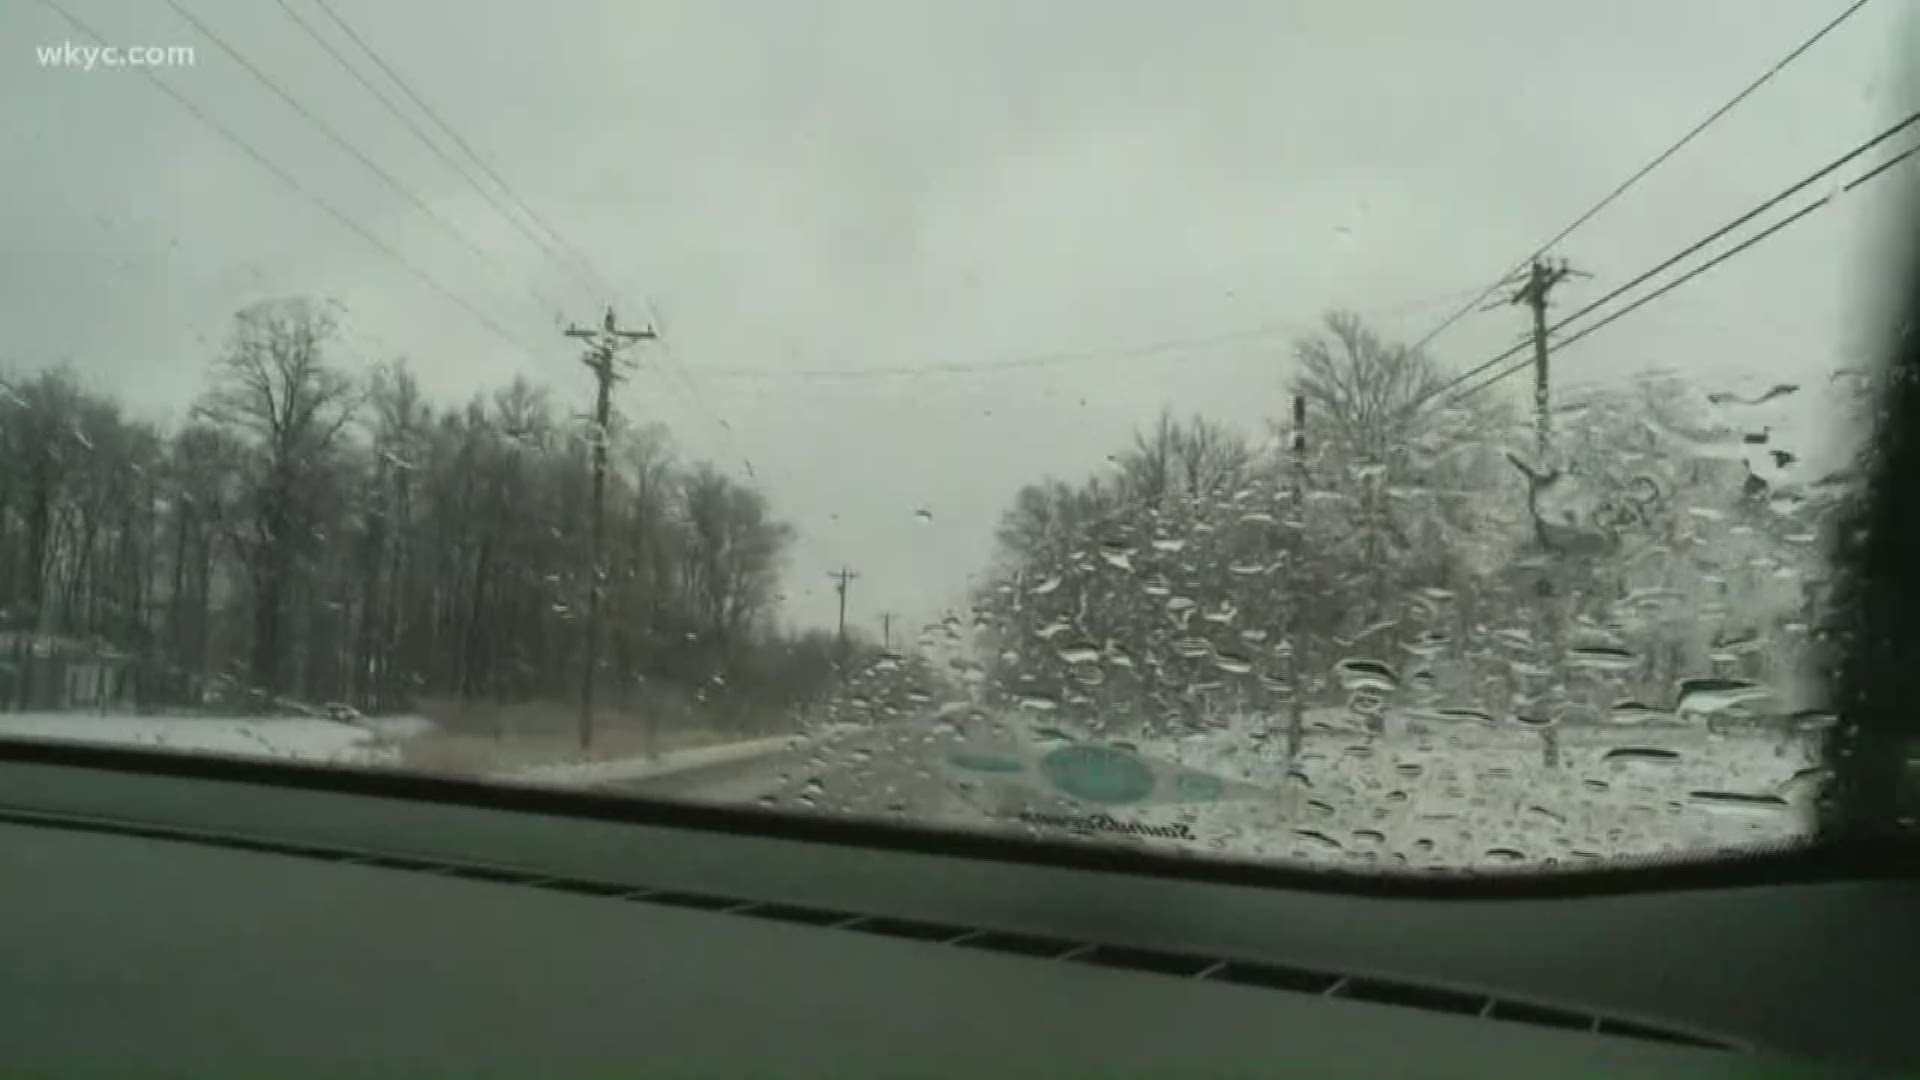 Jan. 18, 2020: It's a mess out there as snow and ice cause tough travel conditions. 3News' Lindsay Buckingham offered this update from Avon Lake Road in Lodi.